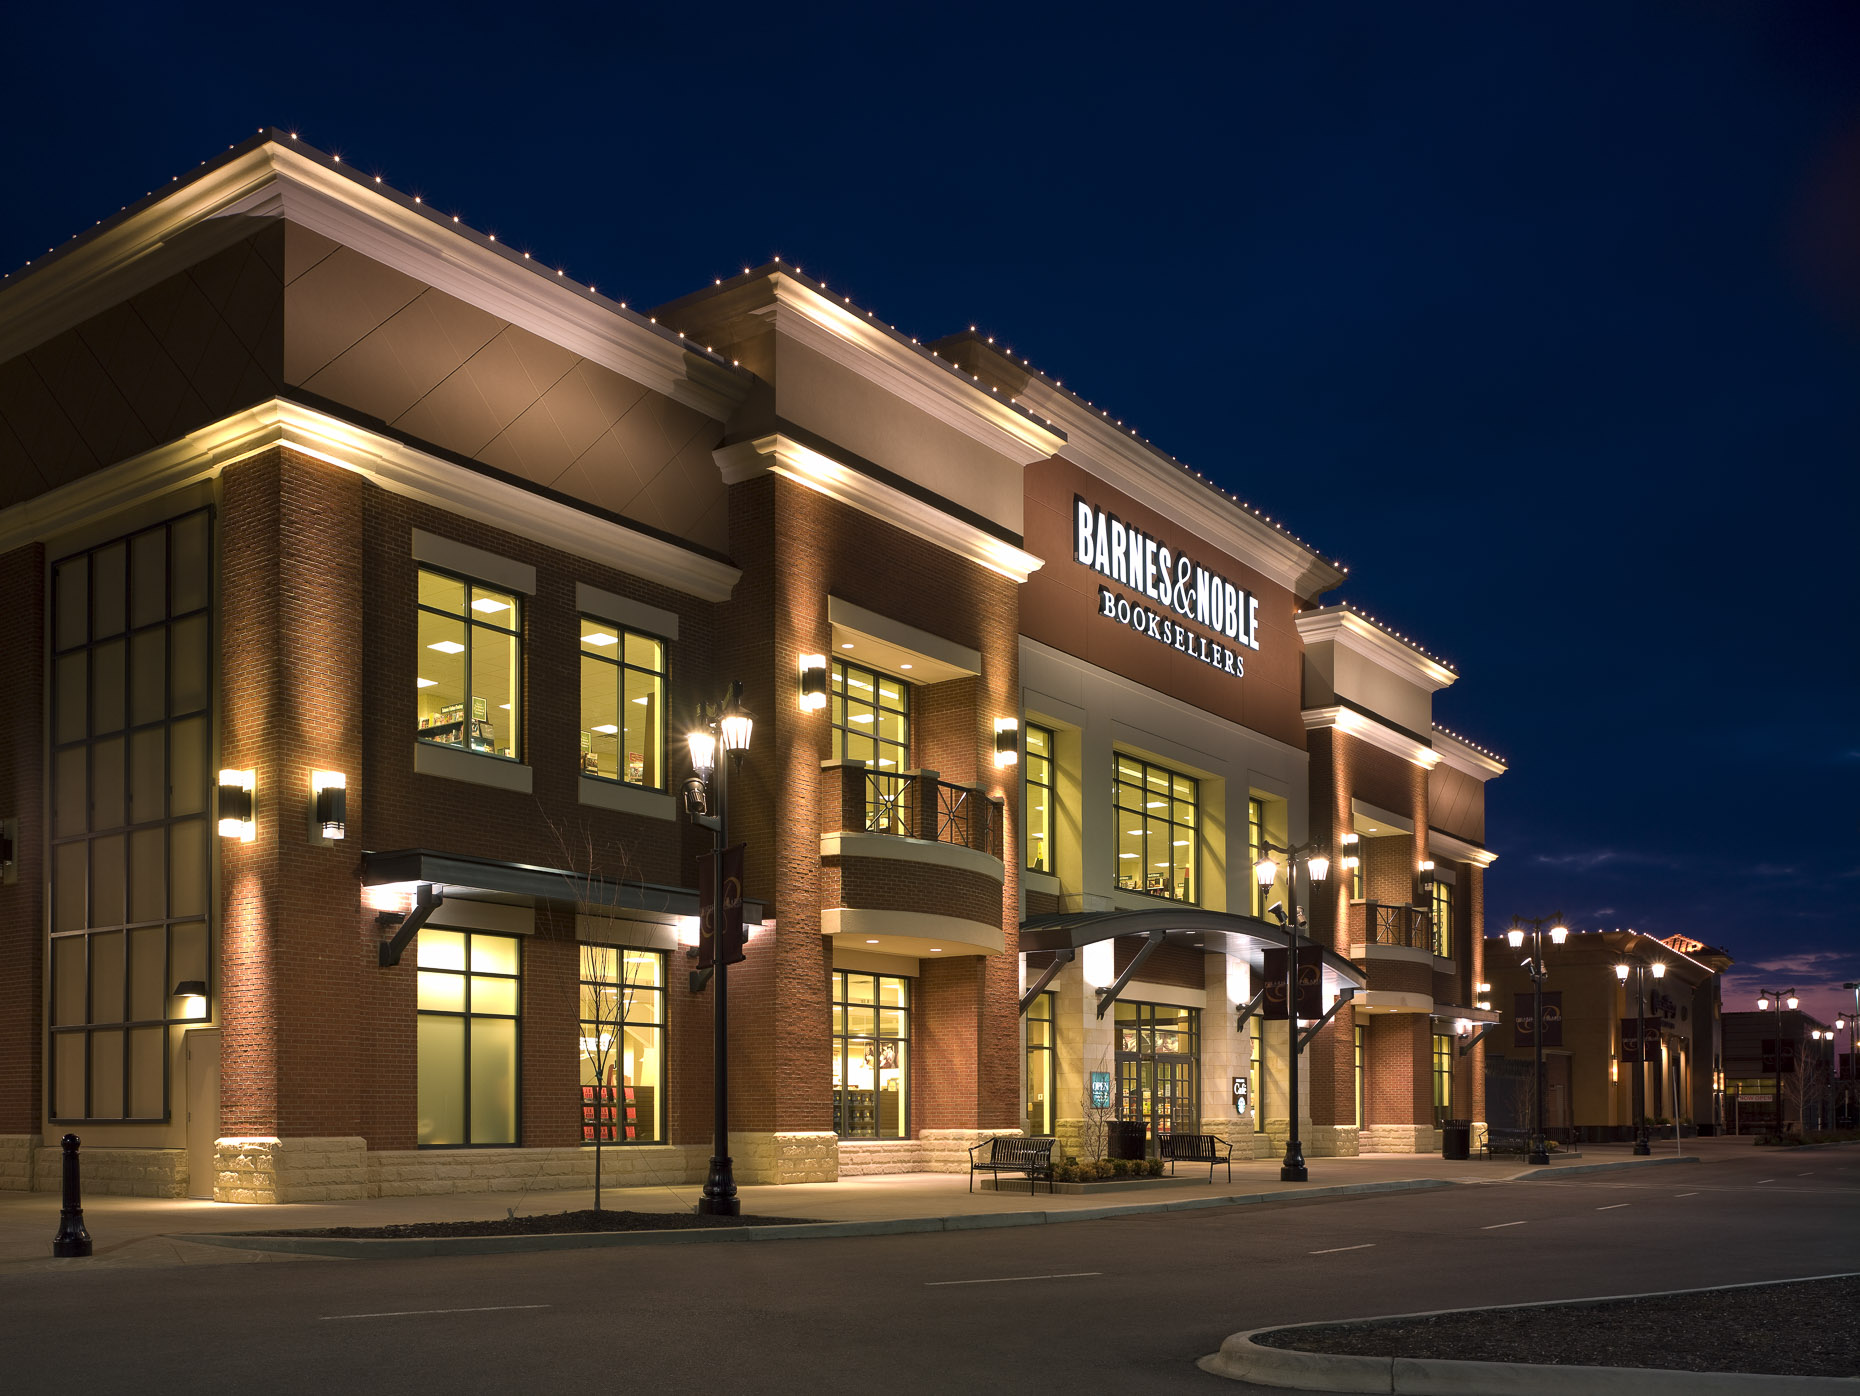 Polaris Fashion Place Barnes & Noble photographed by Brad Feinknopf based in Columbus, Ohio